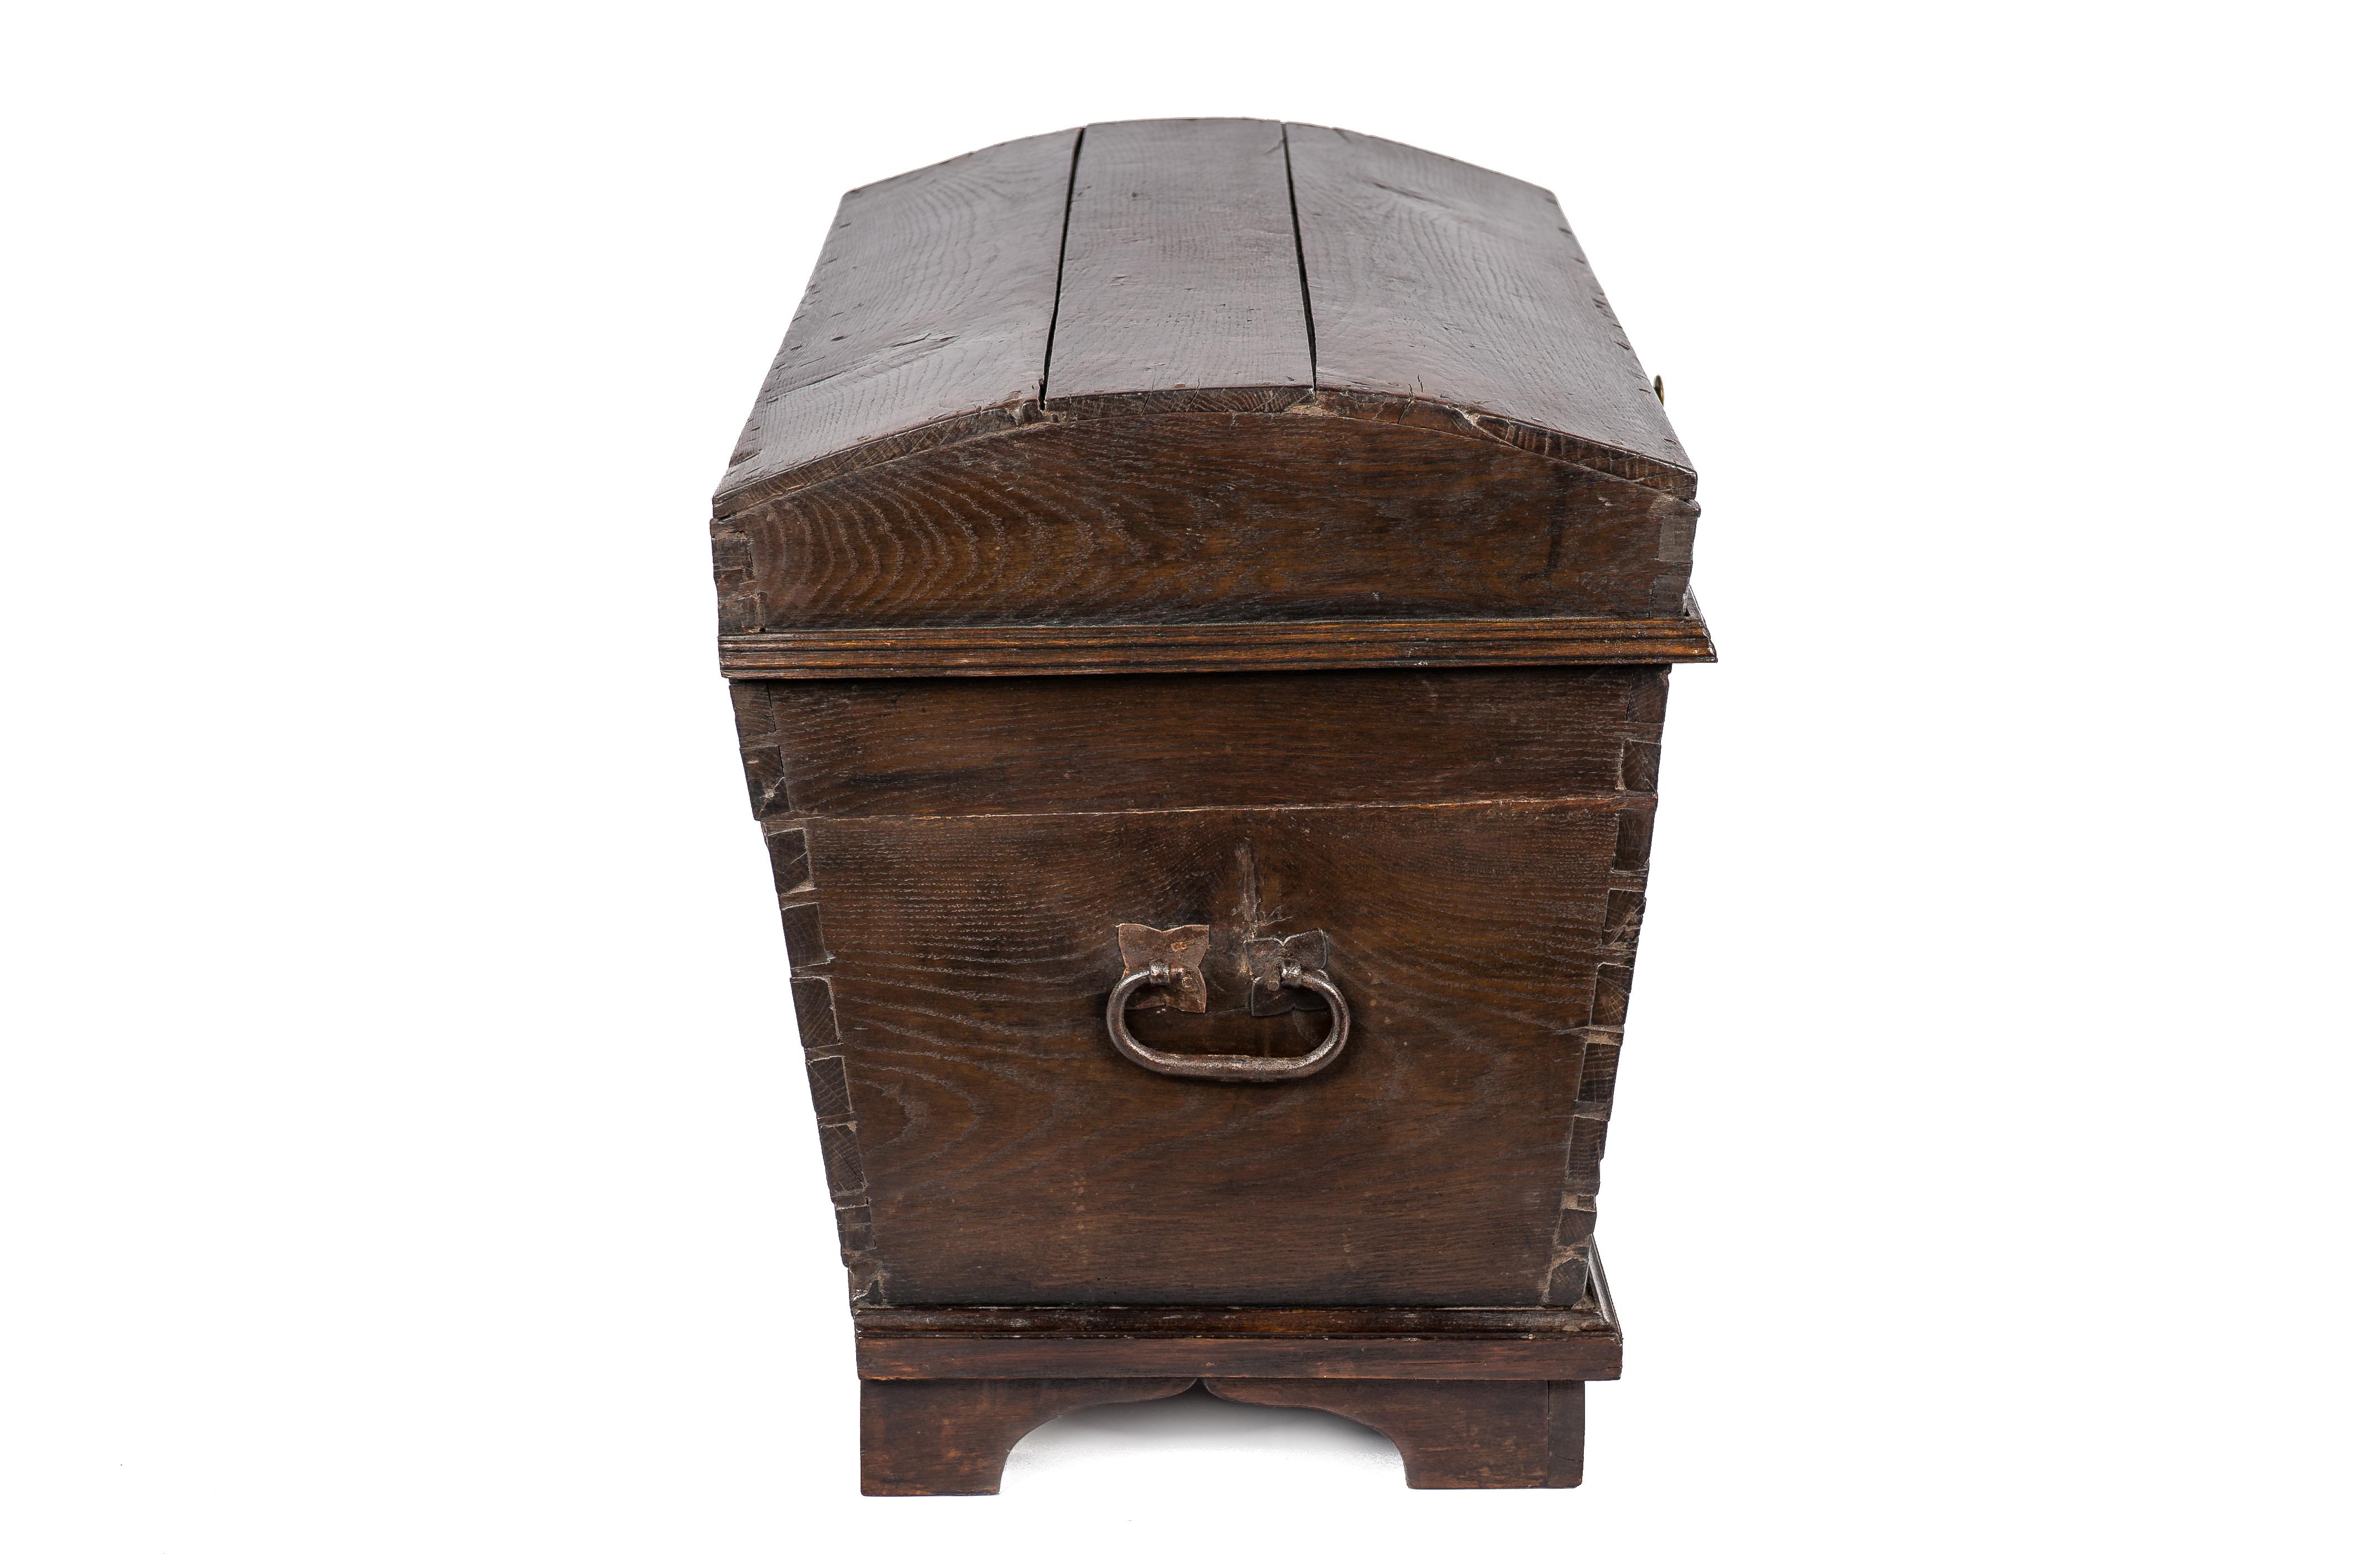 Forged Antique 19th Century German Solid Oak Dome Top Chest Trunk Coffer Box For Sale